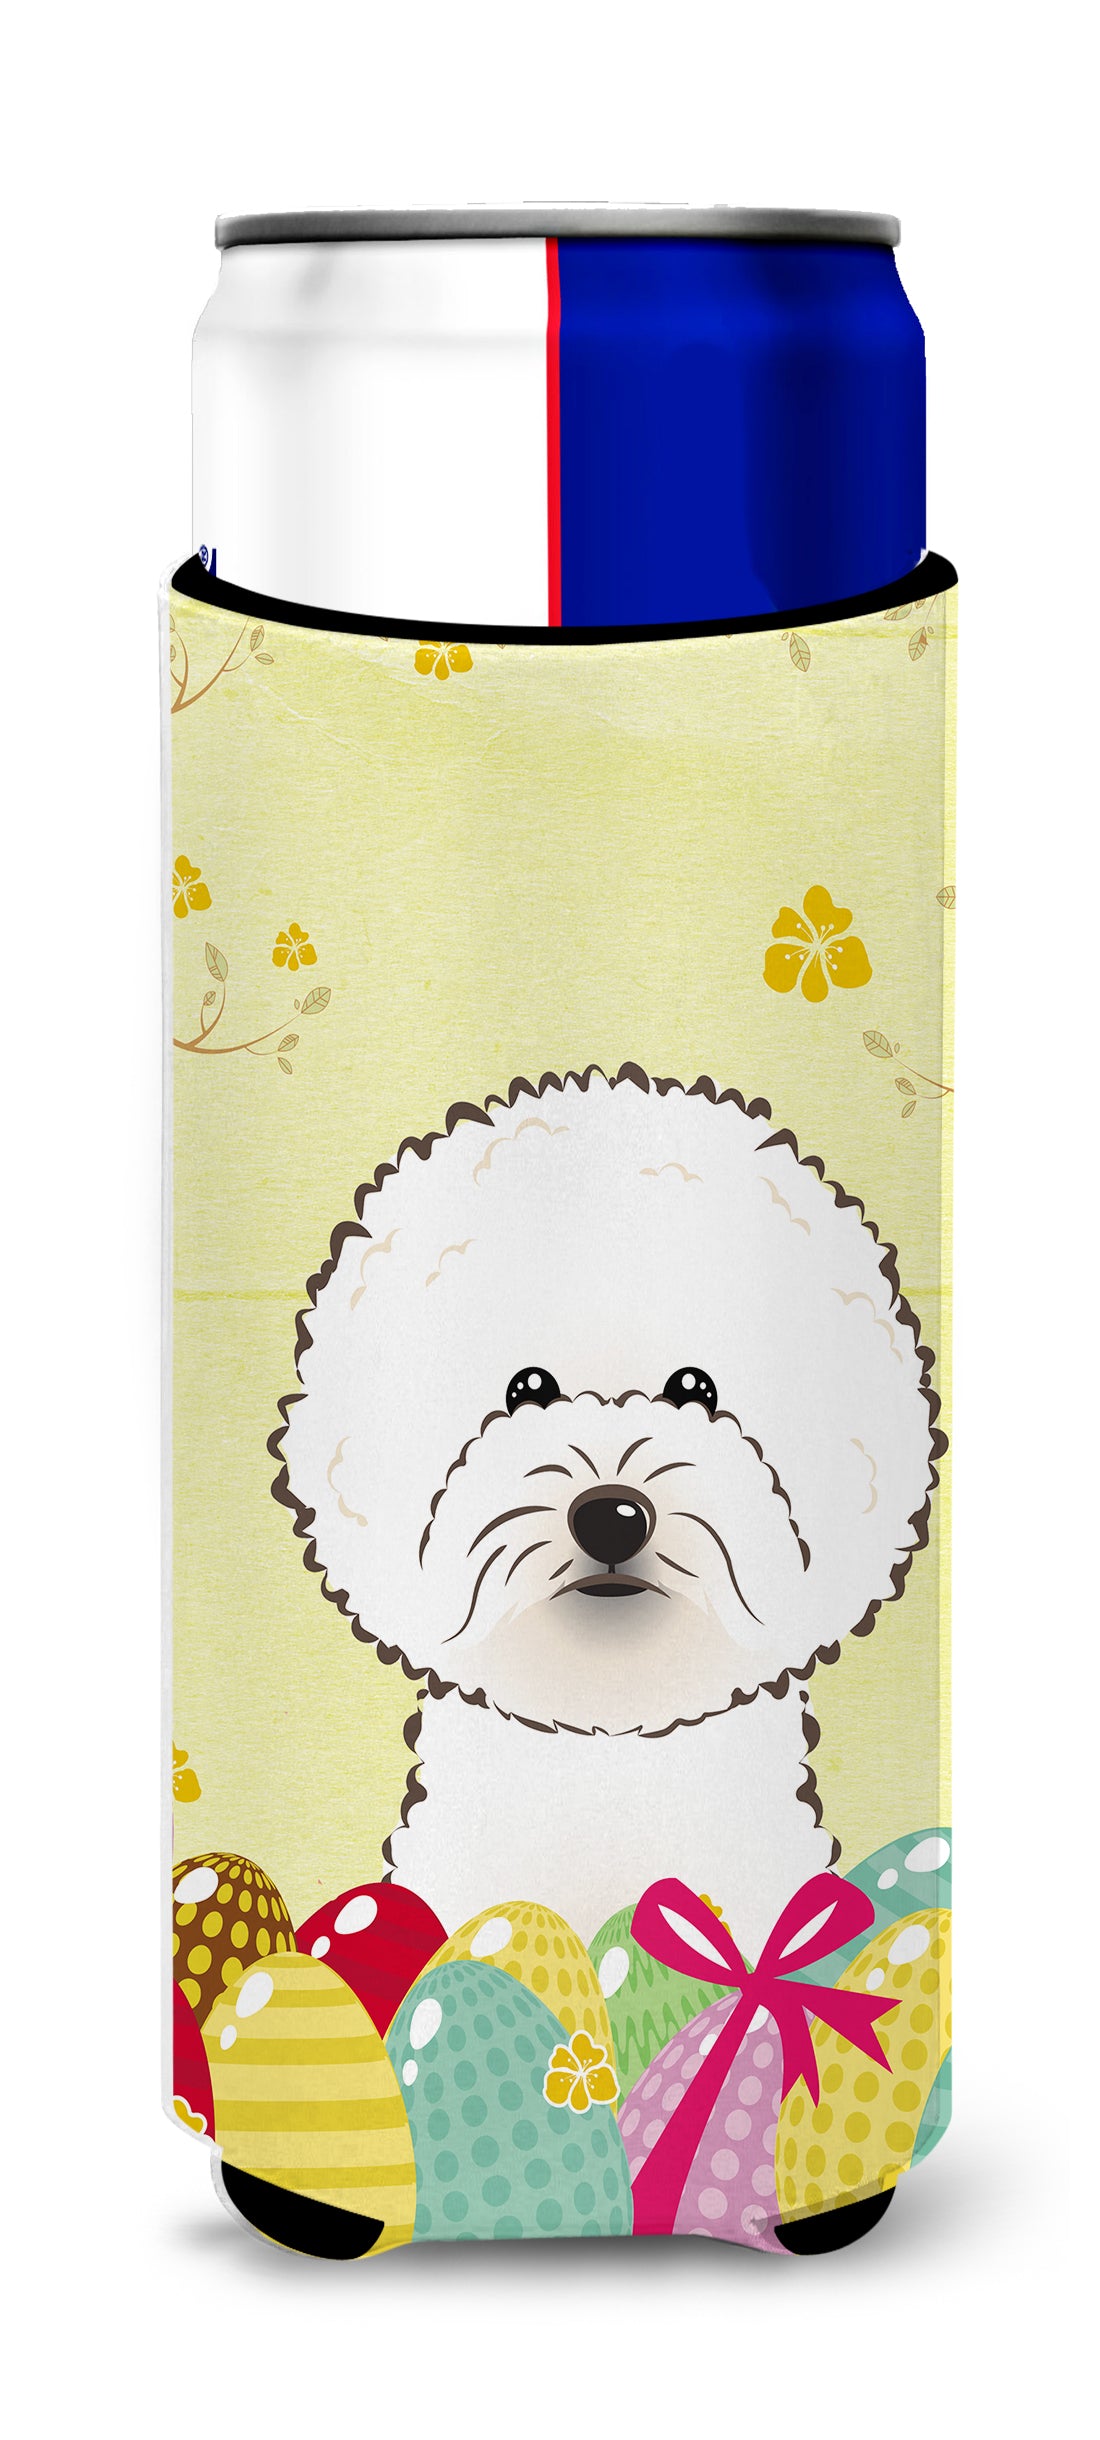 Bichon Frise Easter Egg Hunt  Ultra Beverage Insulator for slim cans BB1899MUK  the-store.com.